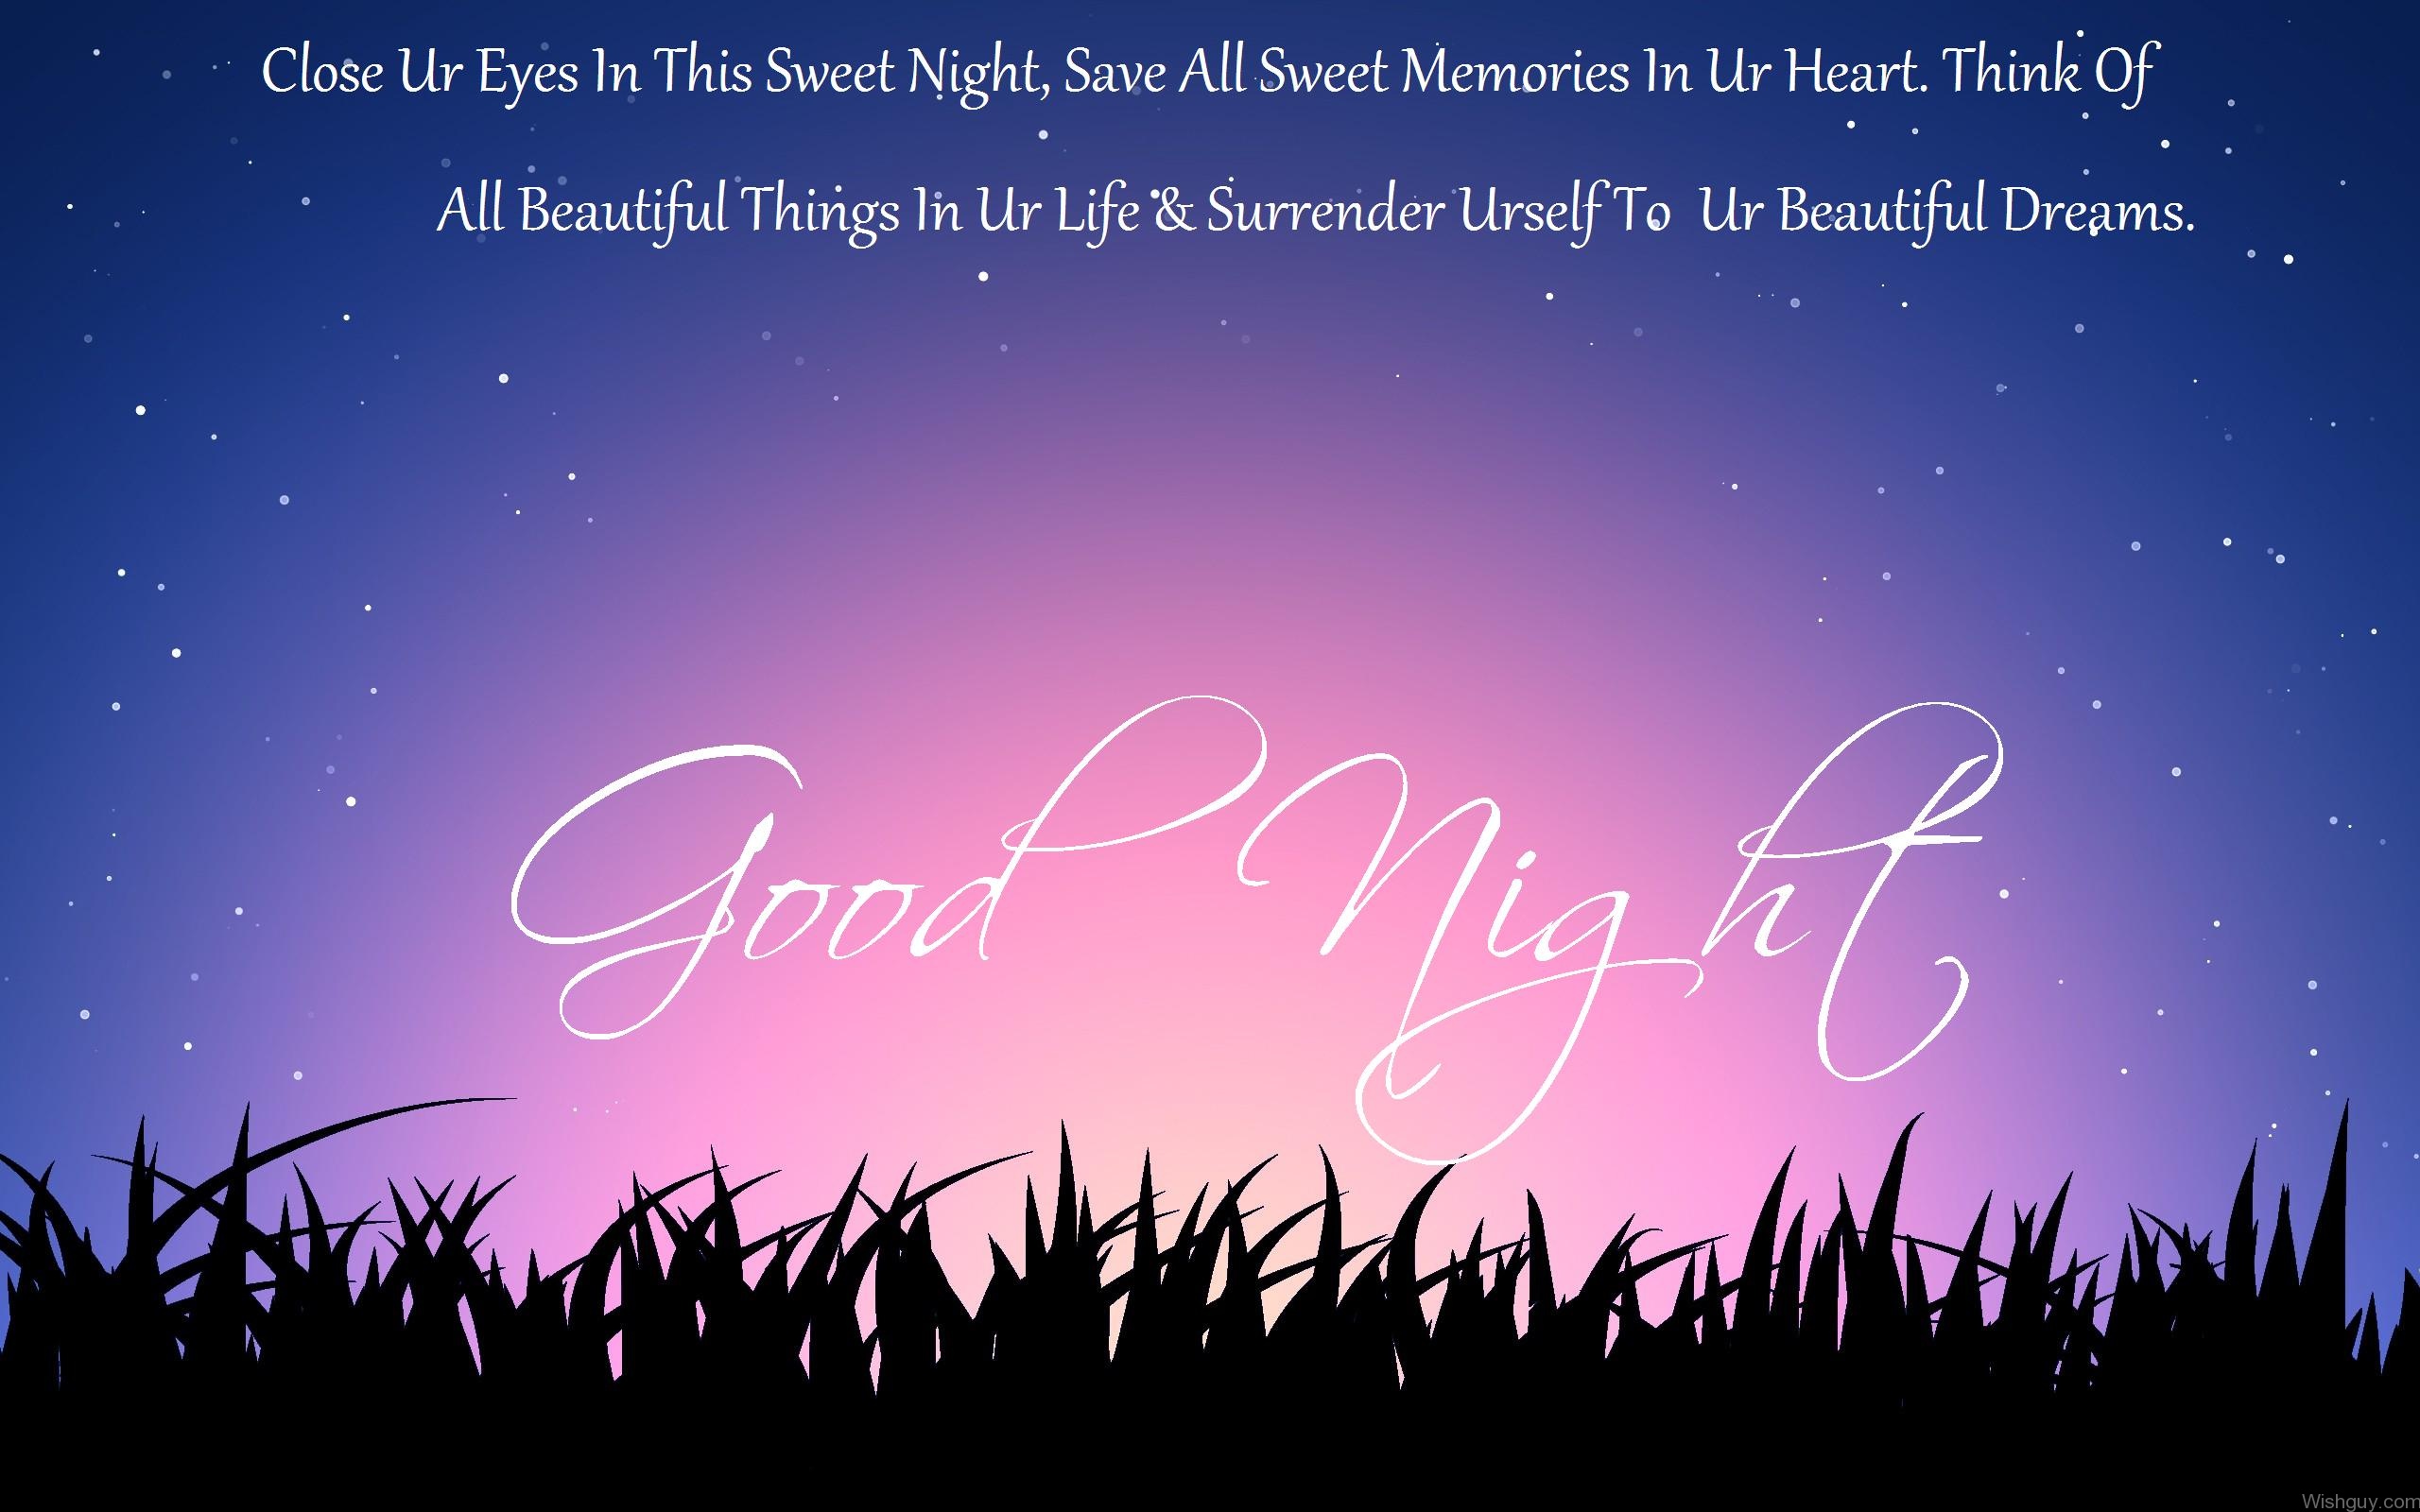 Good Night Blessings - Wishes, Greetings, Pictures – Wish Guy